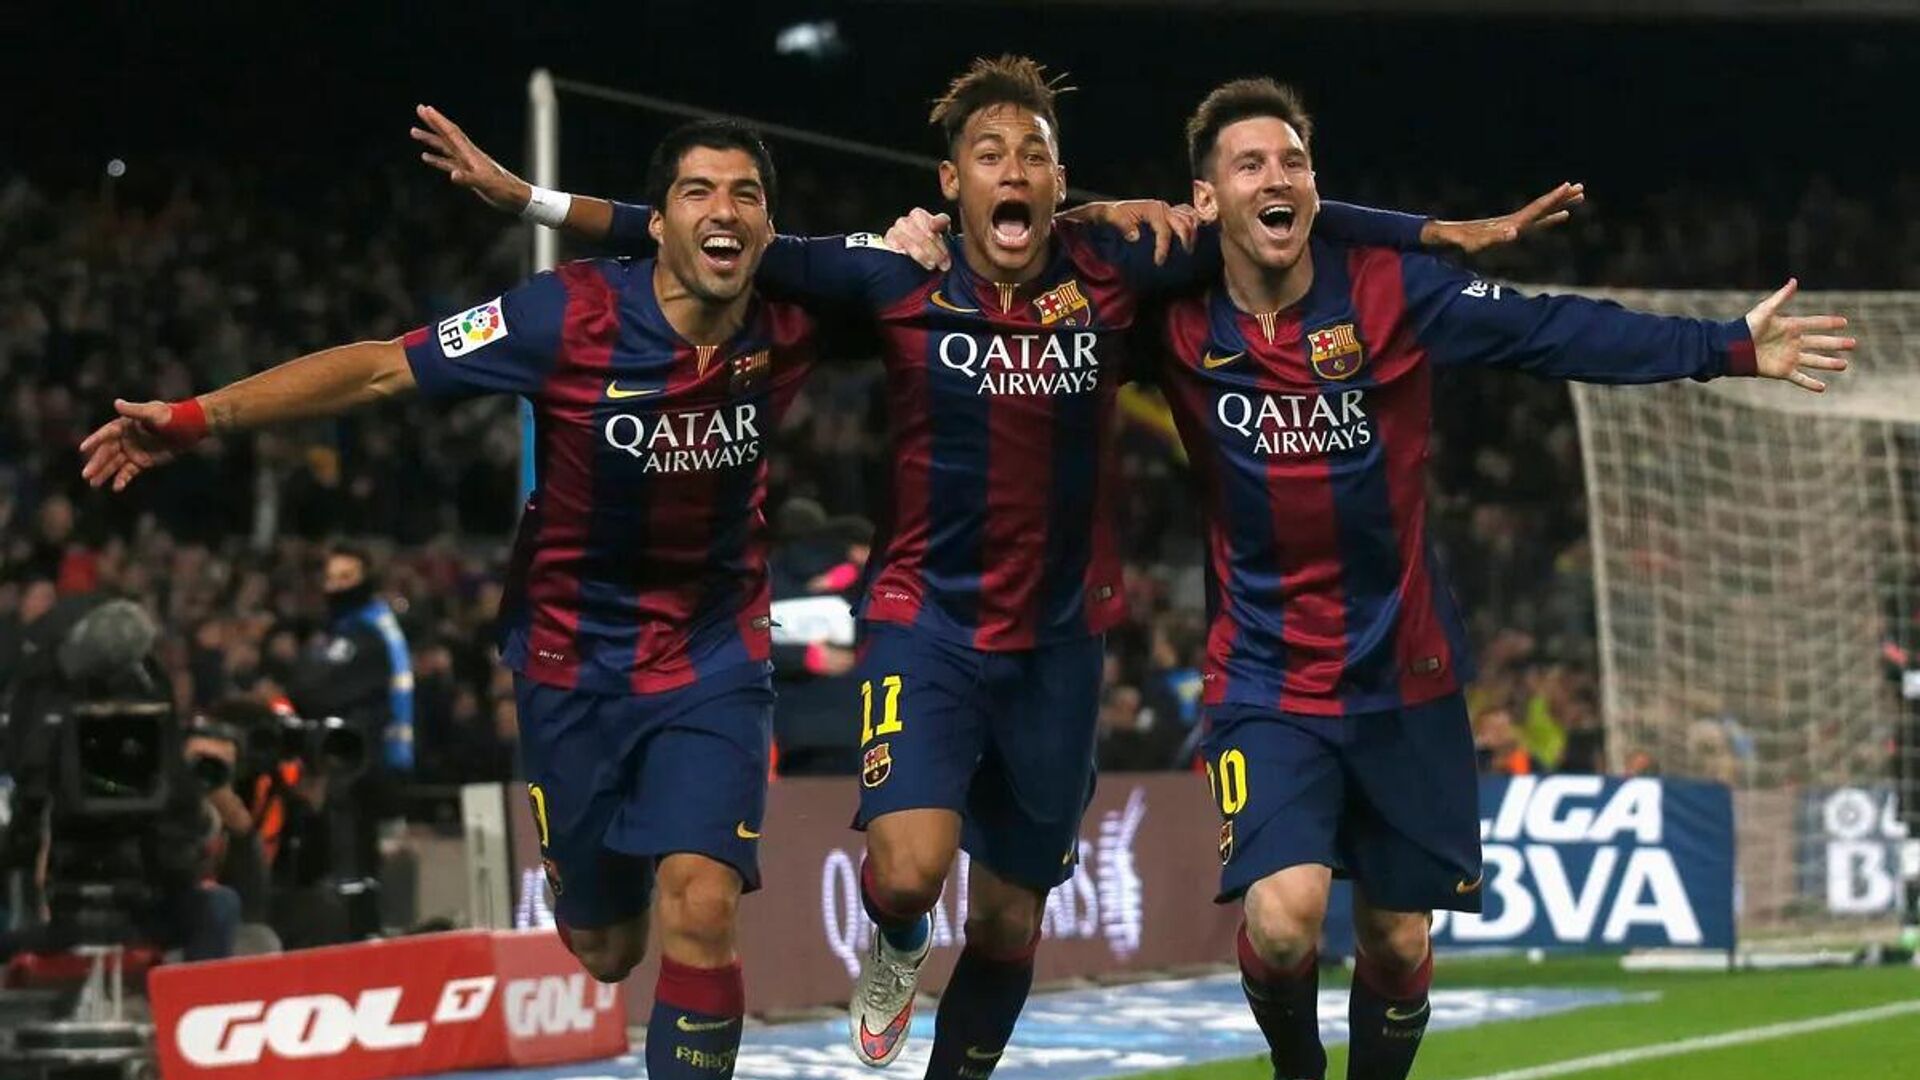 Messi, Suarez and Neymar agree to end their careers at the same club